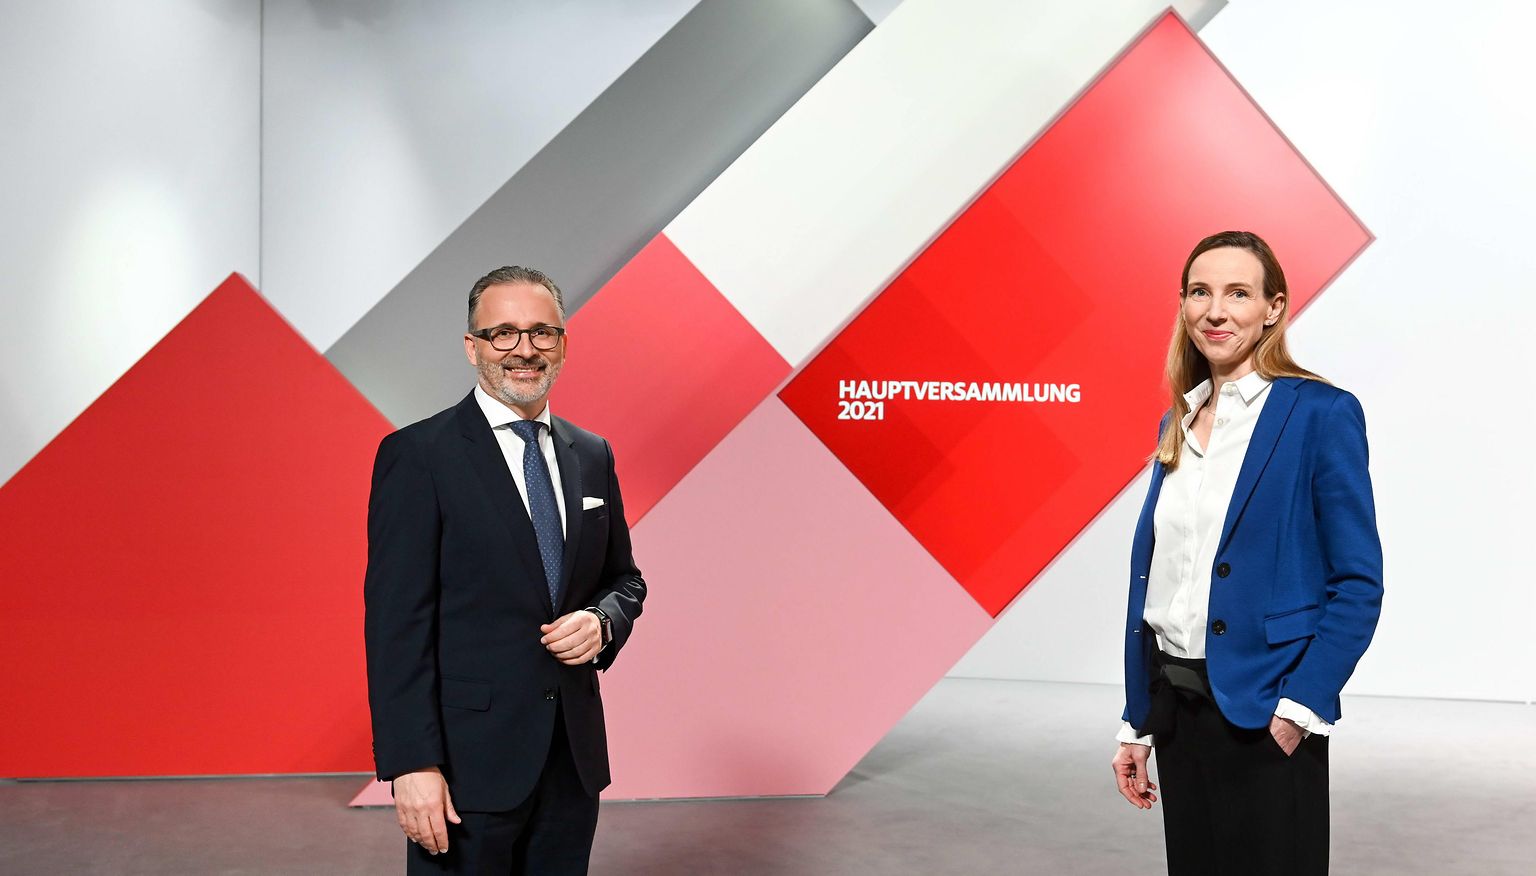 
Carsten Knobel, Chairman of the Henkel Management Board, and Dr. Simone Bagel-Trah, Chairwoman of the Supervisory Board and Shareholders' Committee